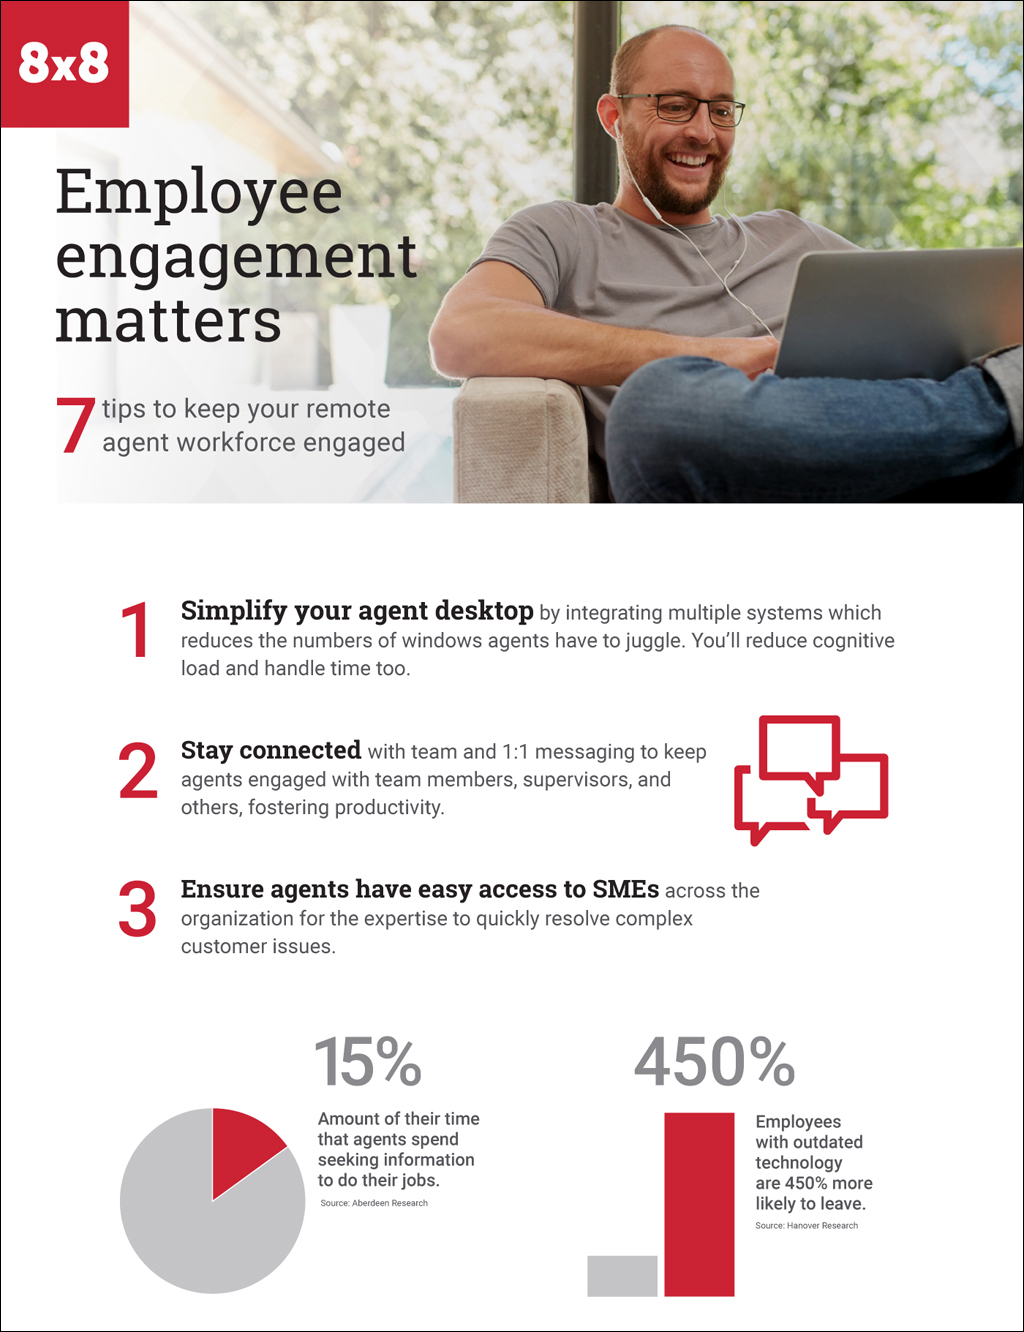 Online infographic discussing employee engagement statistics